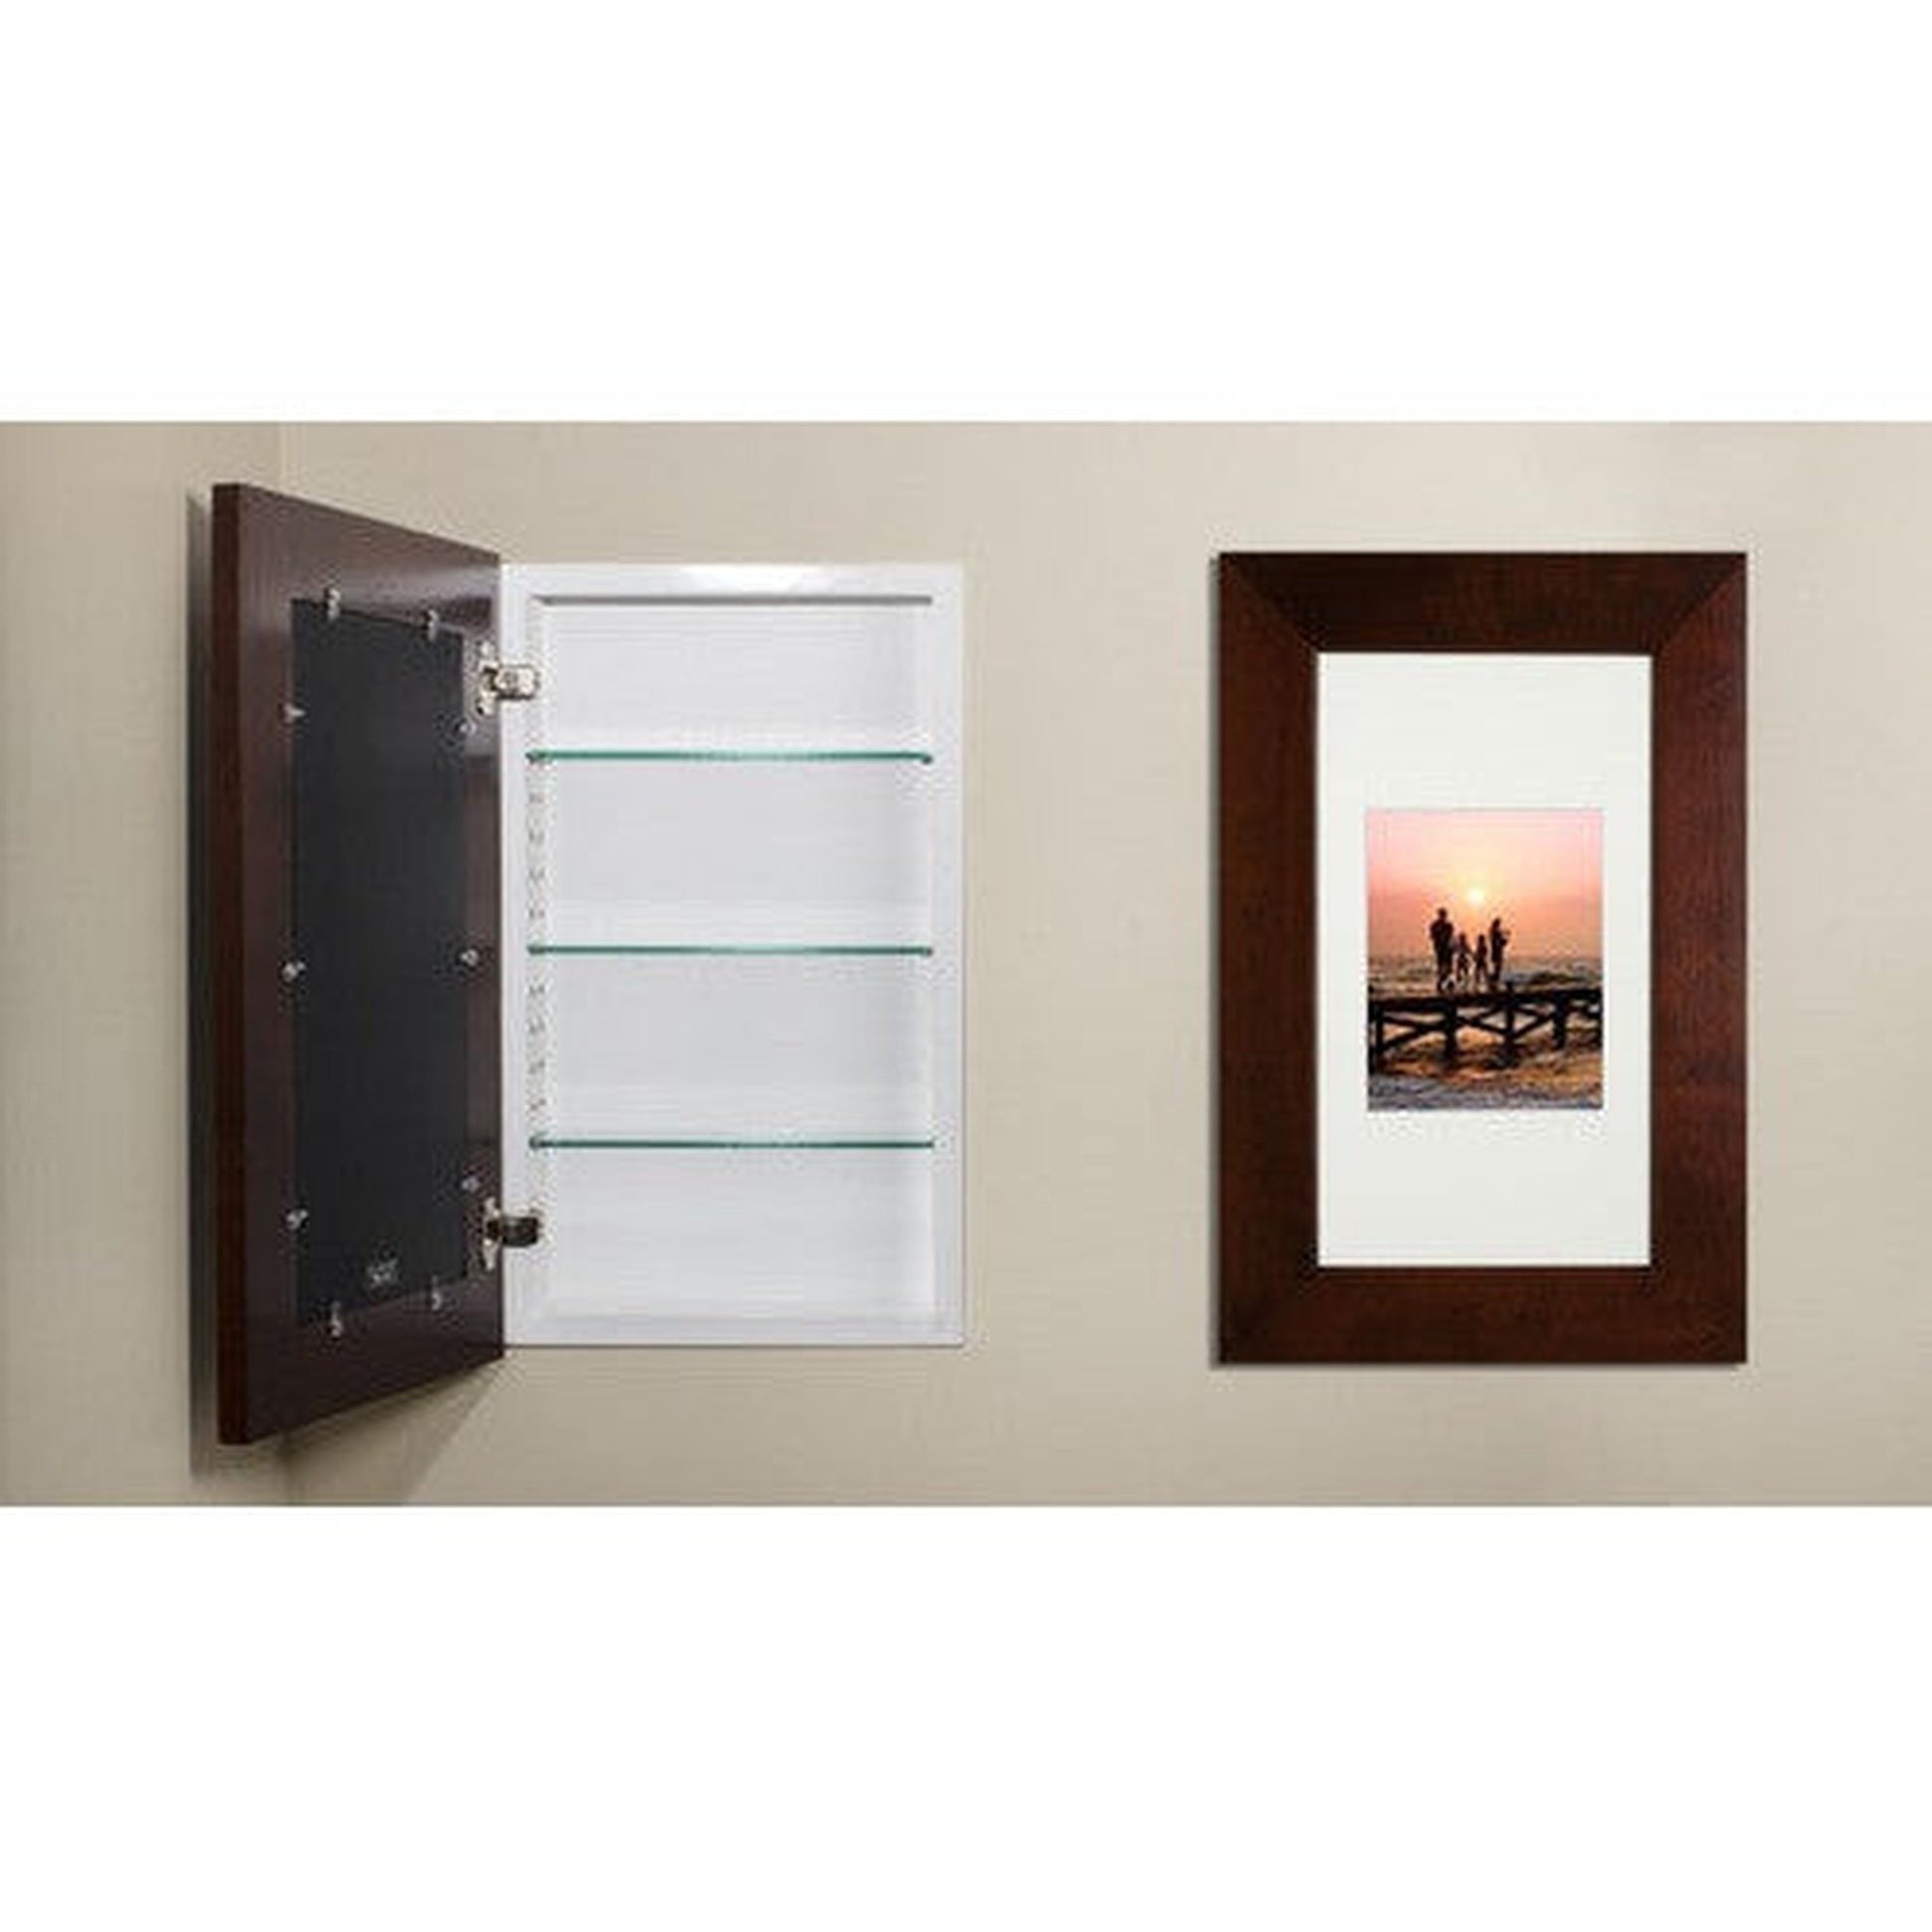 Fox Hollow Furnishings 14" x 24" Espresso Extra Large Standard 3.75" Depth White Interior Recessed Picture Frame Medicine Cabinet With Mirror and Black Matting